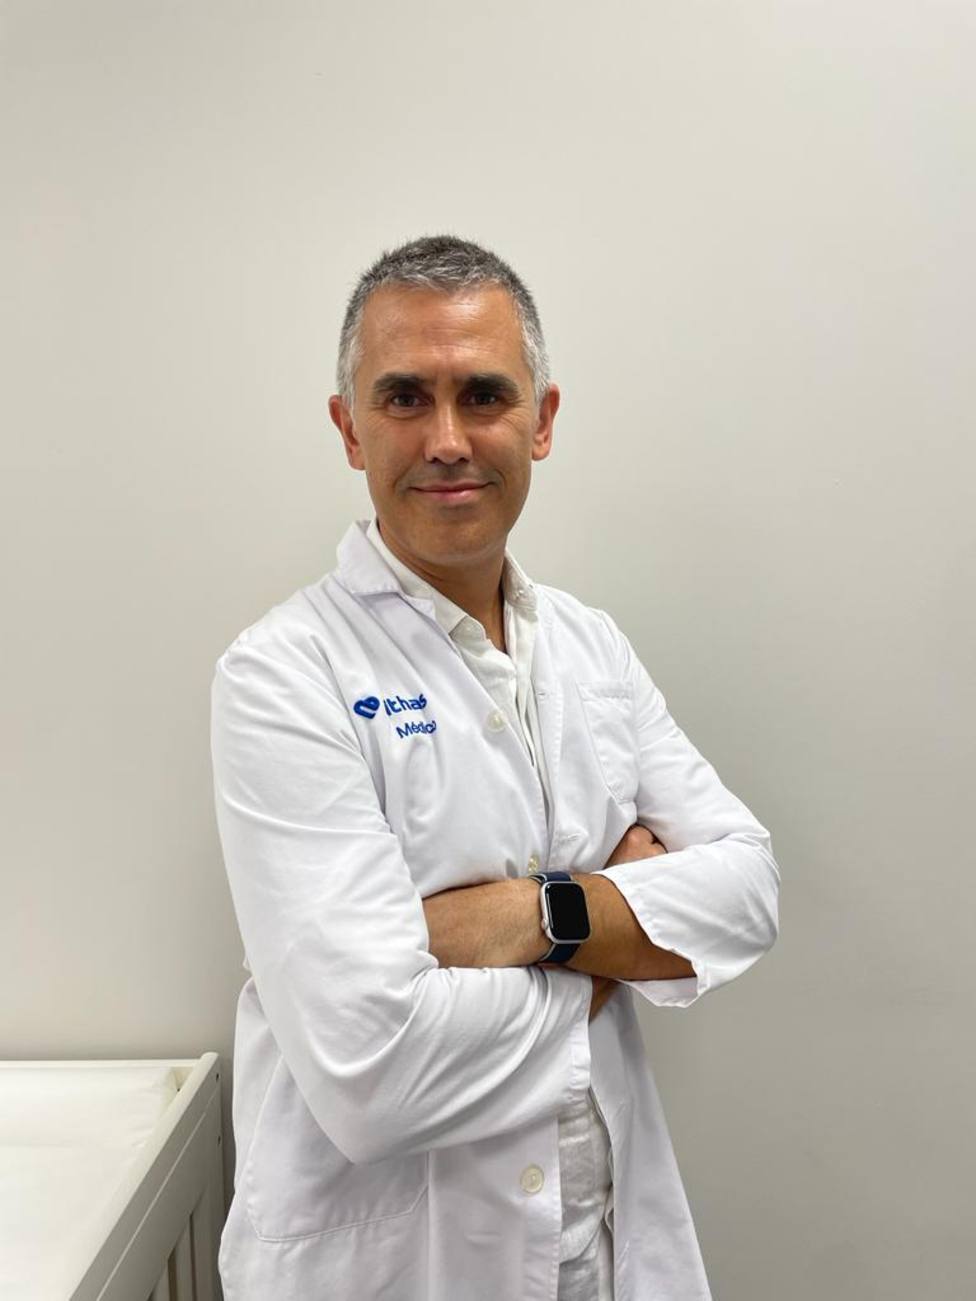 The urinary tract is where bacterial infections are most concentrated in childhood – Castellon